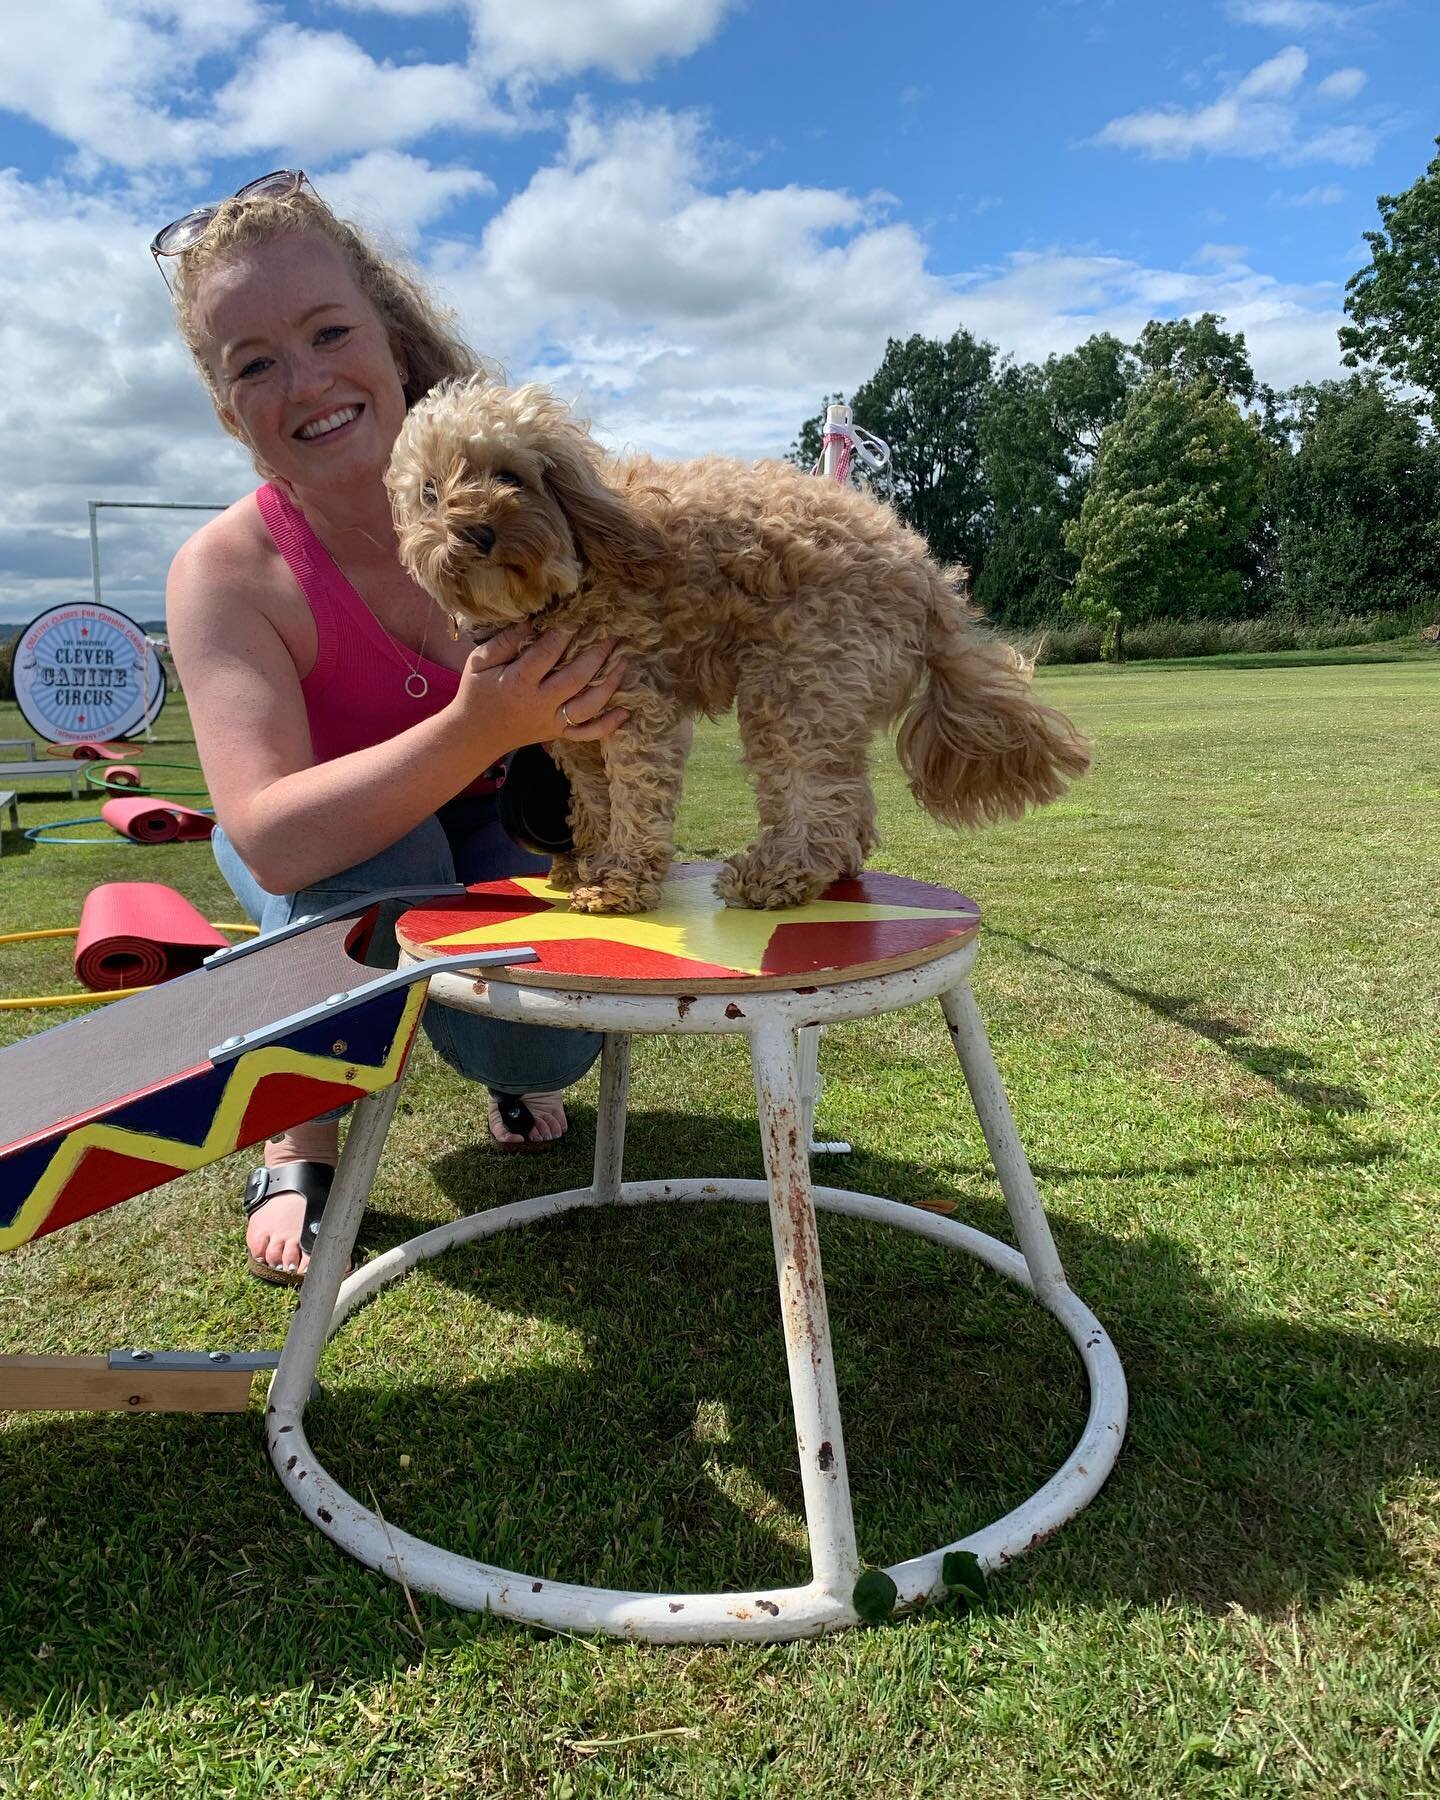 Nothing beats that &lsquo;we did it&rsquo; feeling! Come to the Circus and (re)discover the joy of learning new things with your dog 🐶 🎪#incrediblyclever #caninecircus #puttingthemagicbackintodogtraining #creatingthegreatestdogsonearth